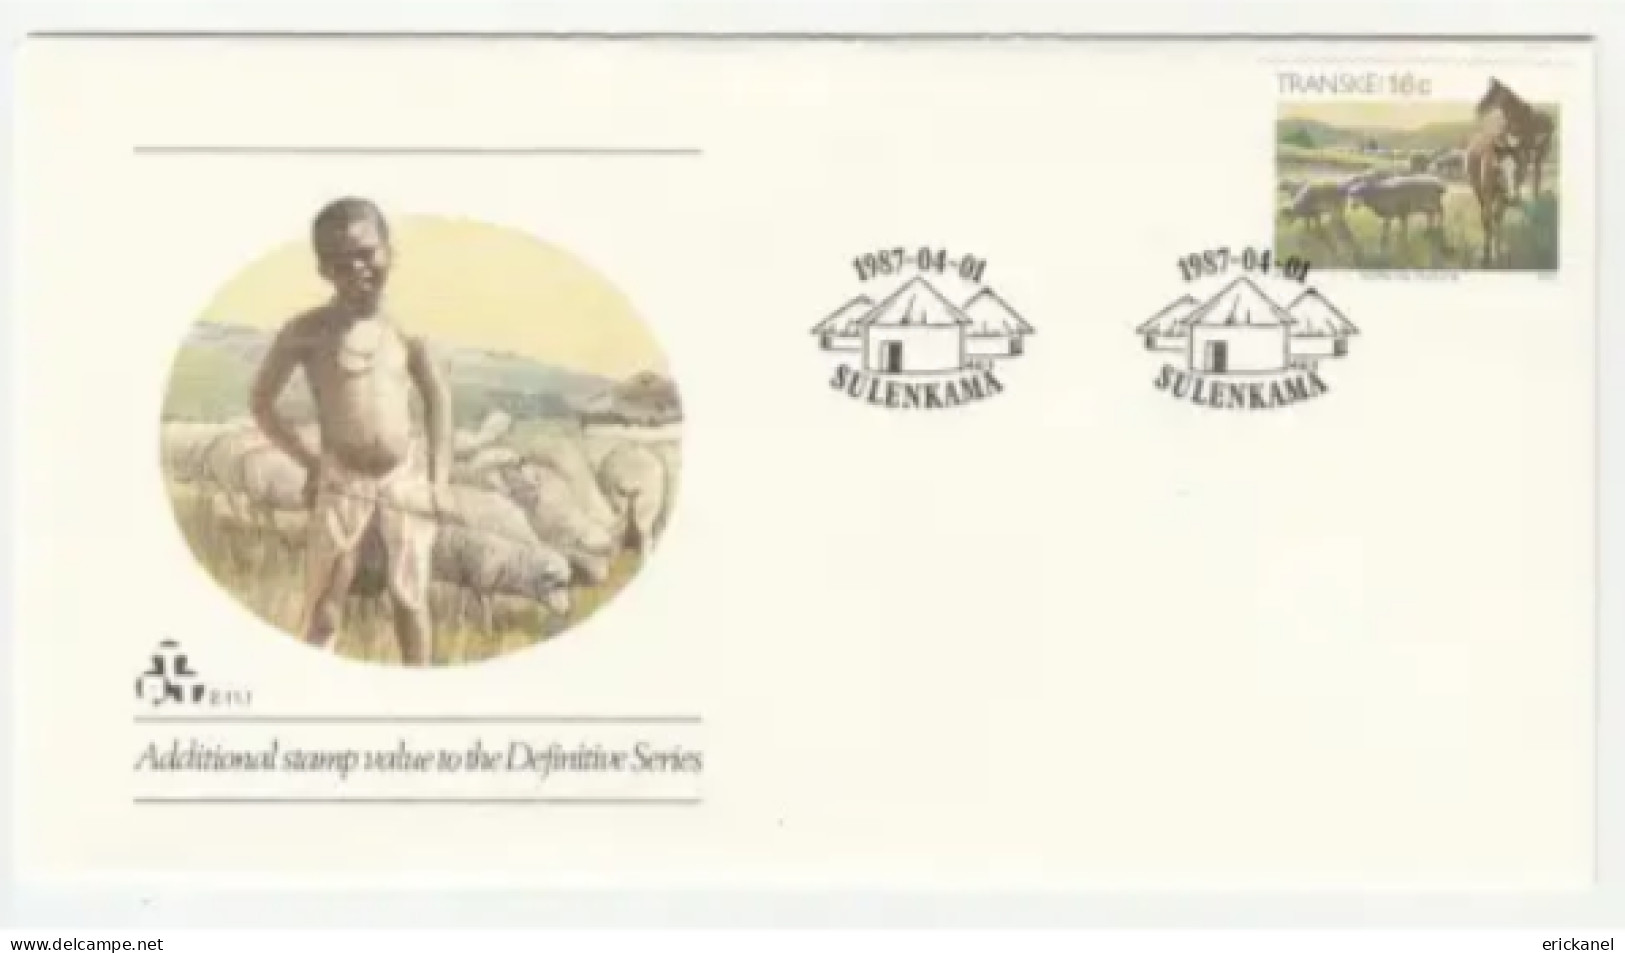 1987 Transkei Additional Stamp Value To The Definitive Series FDC 2.11.1 - Transkei